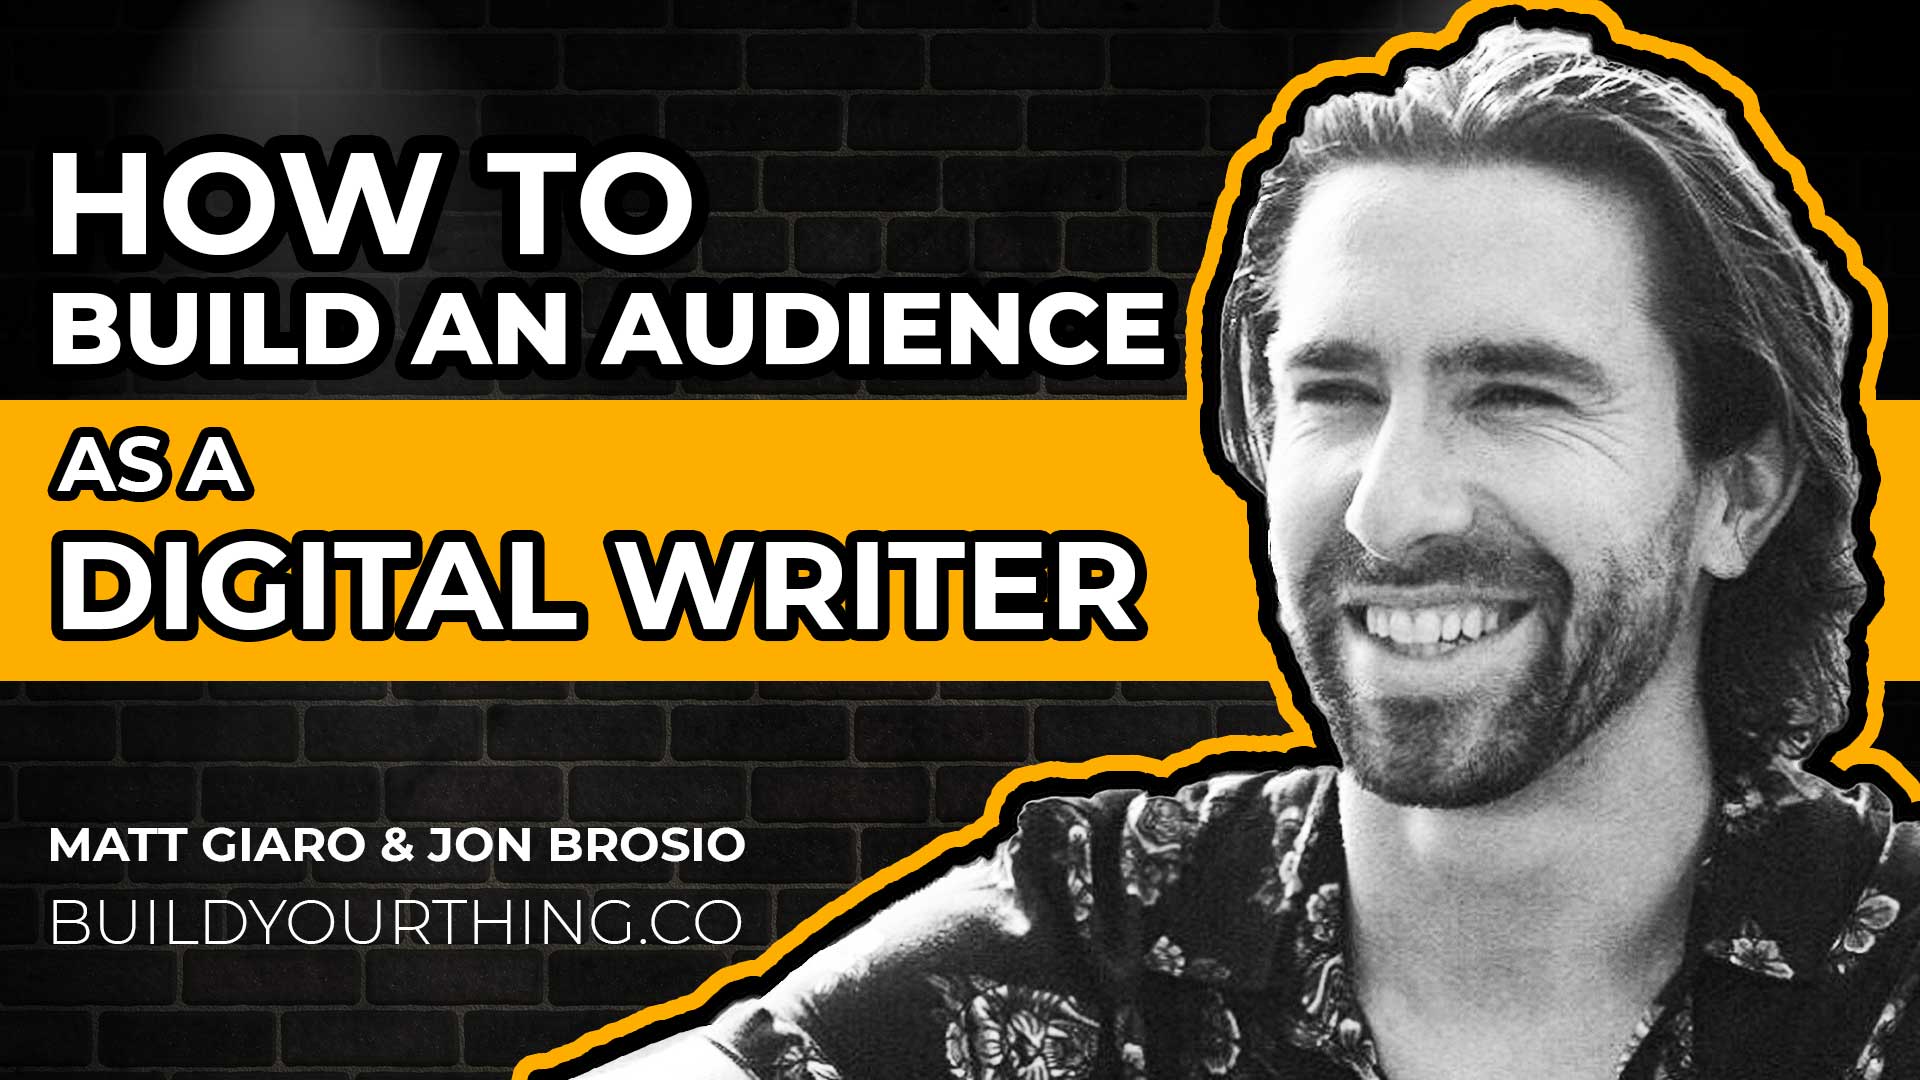 How to Build an Audience as a Digital Writer